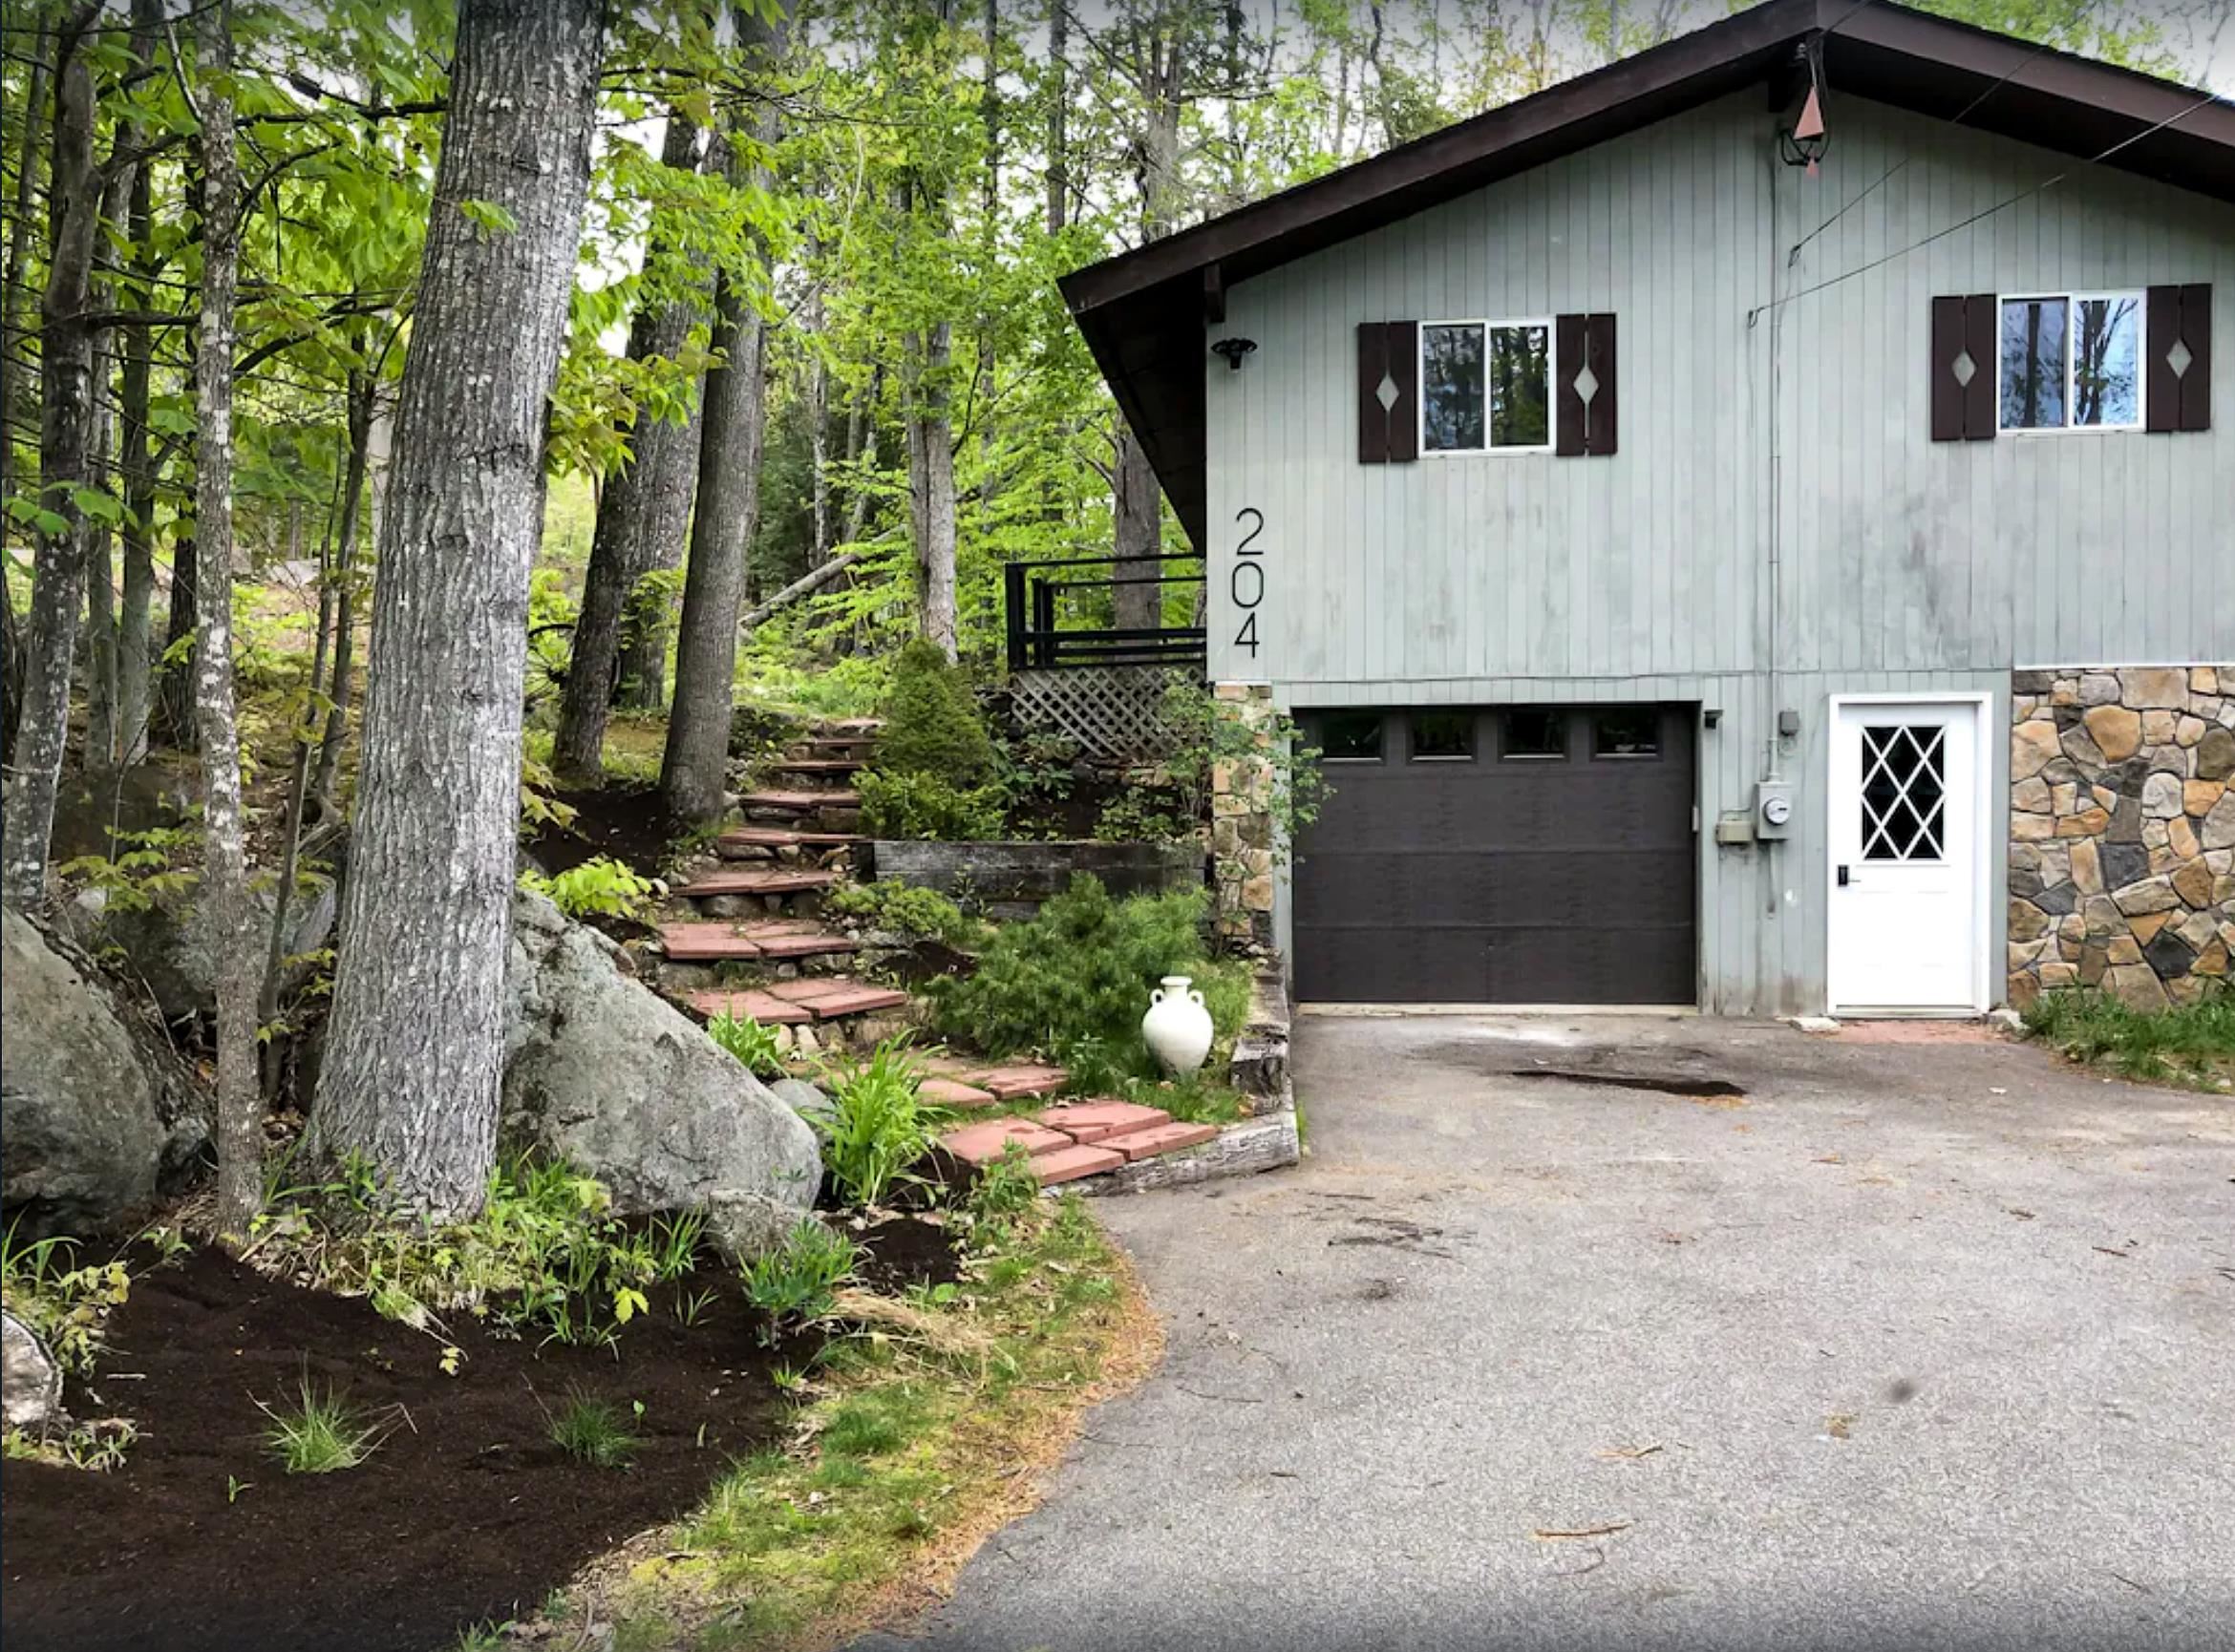 204 Dundee Road, Bartlett, New Hampshire, NH 03845, 3 Bedrooms Bedrooms, 5 Rooms Rooms,1 BathroomBathrooms,Single Family,For Sale,4895400